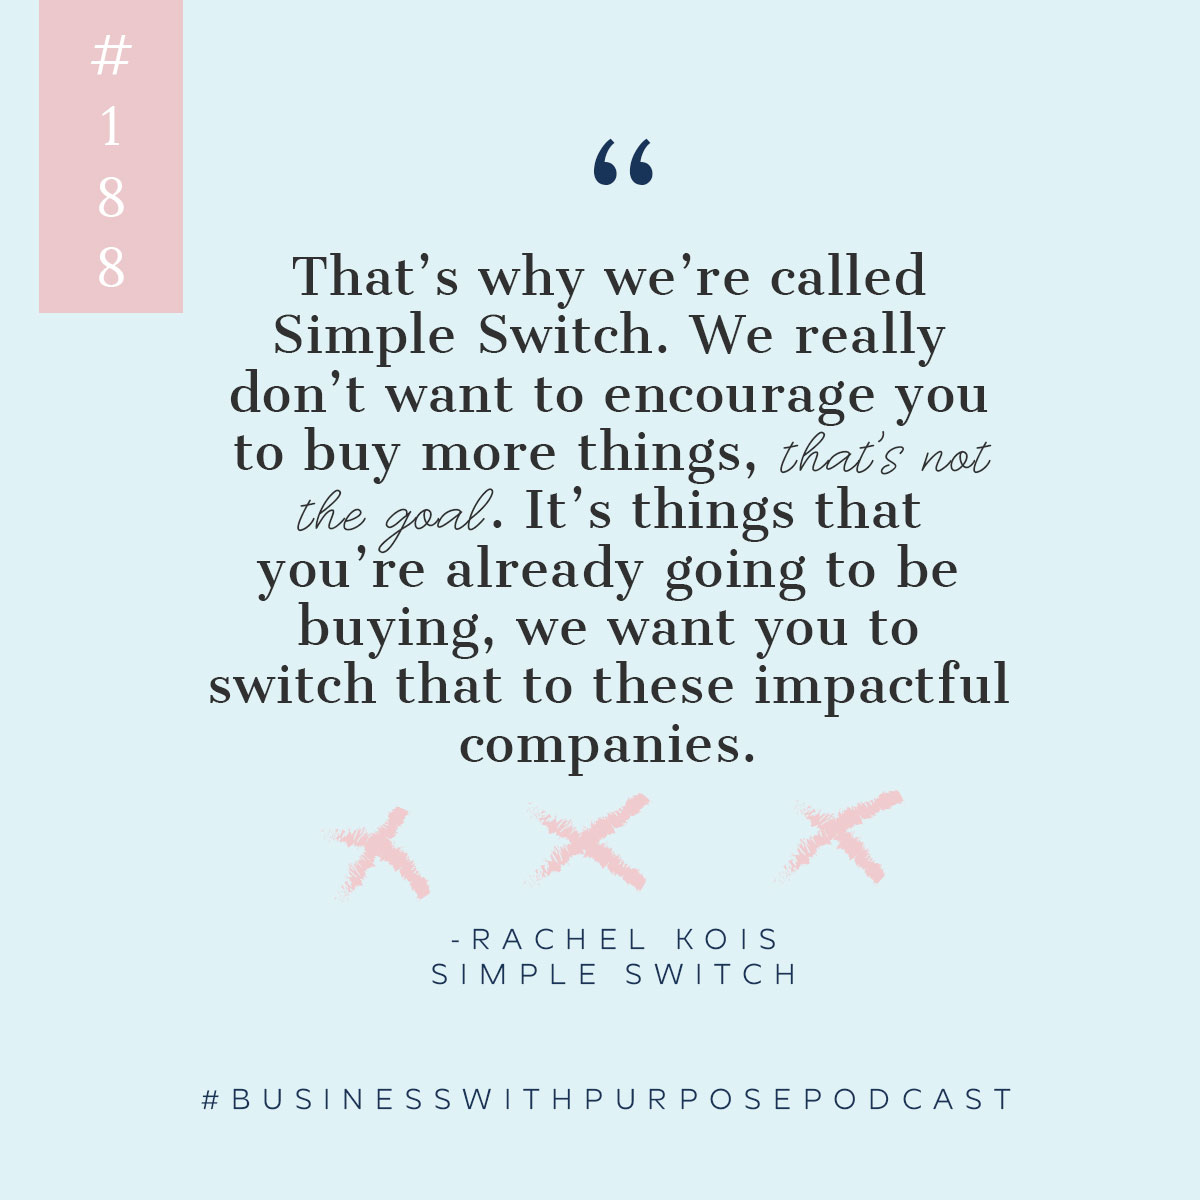 Making the Switch to Ethical Simple | Business with Purpose Podcast EP 188: Rachel Kois, CEO and Founder of Simple Switch